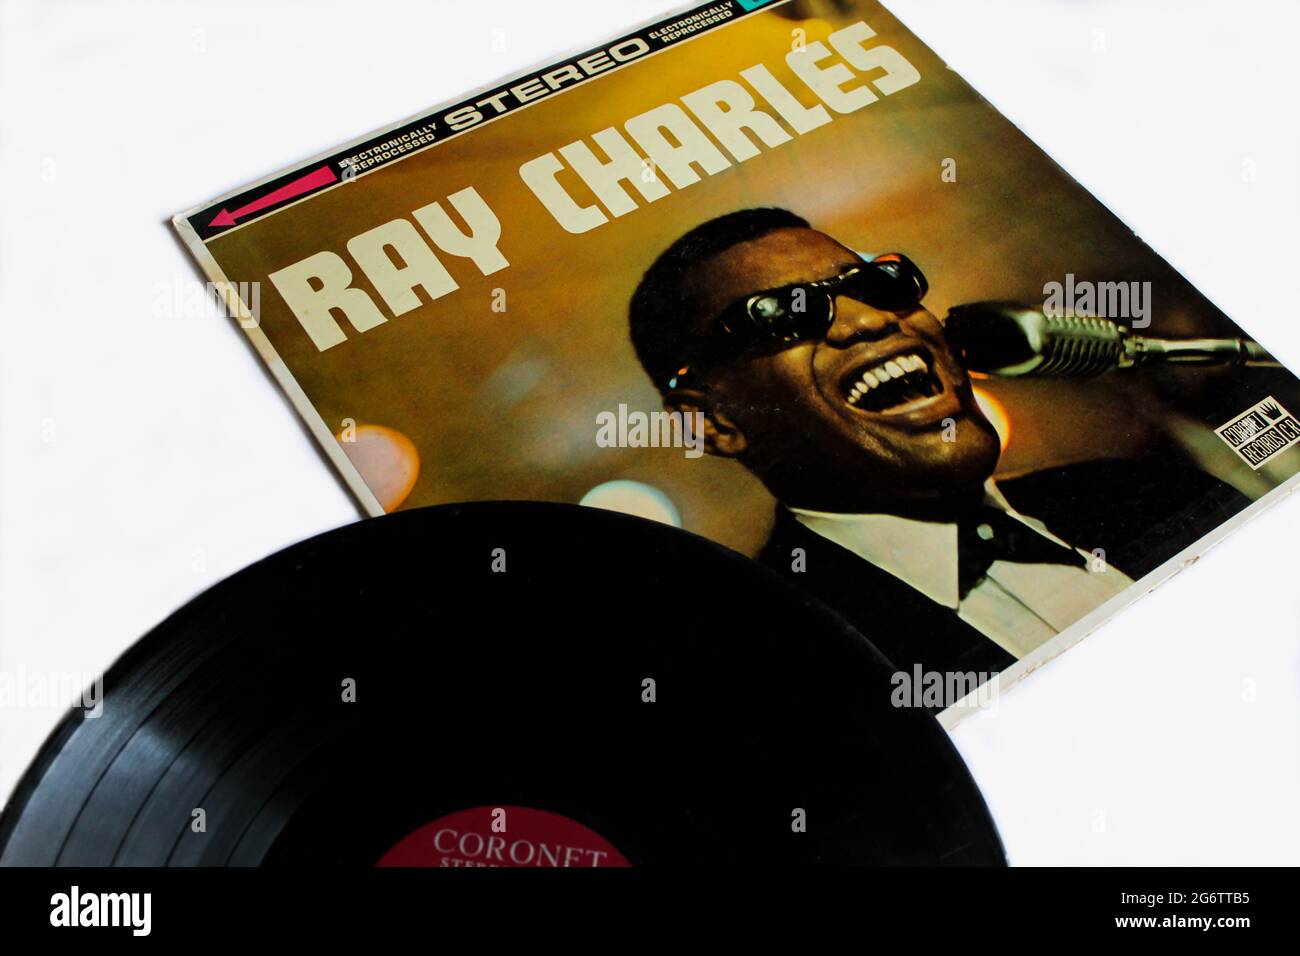 Funk and soul, blues and jazz artist, Ray Charles music album on vinyl record LP disc. Self titled, album cover Stock Photo